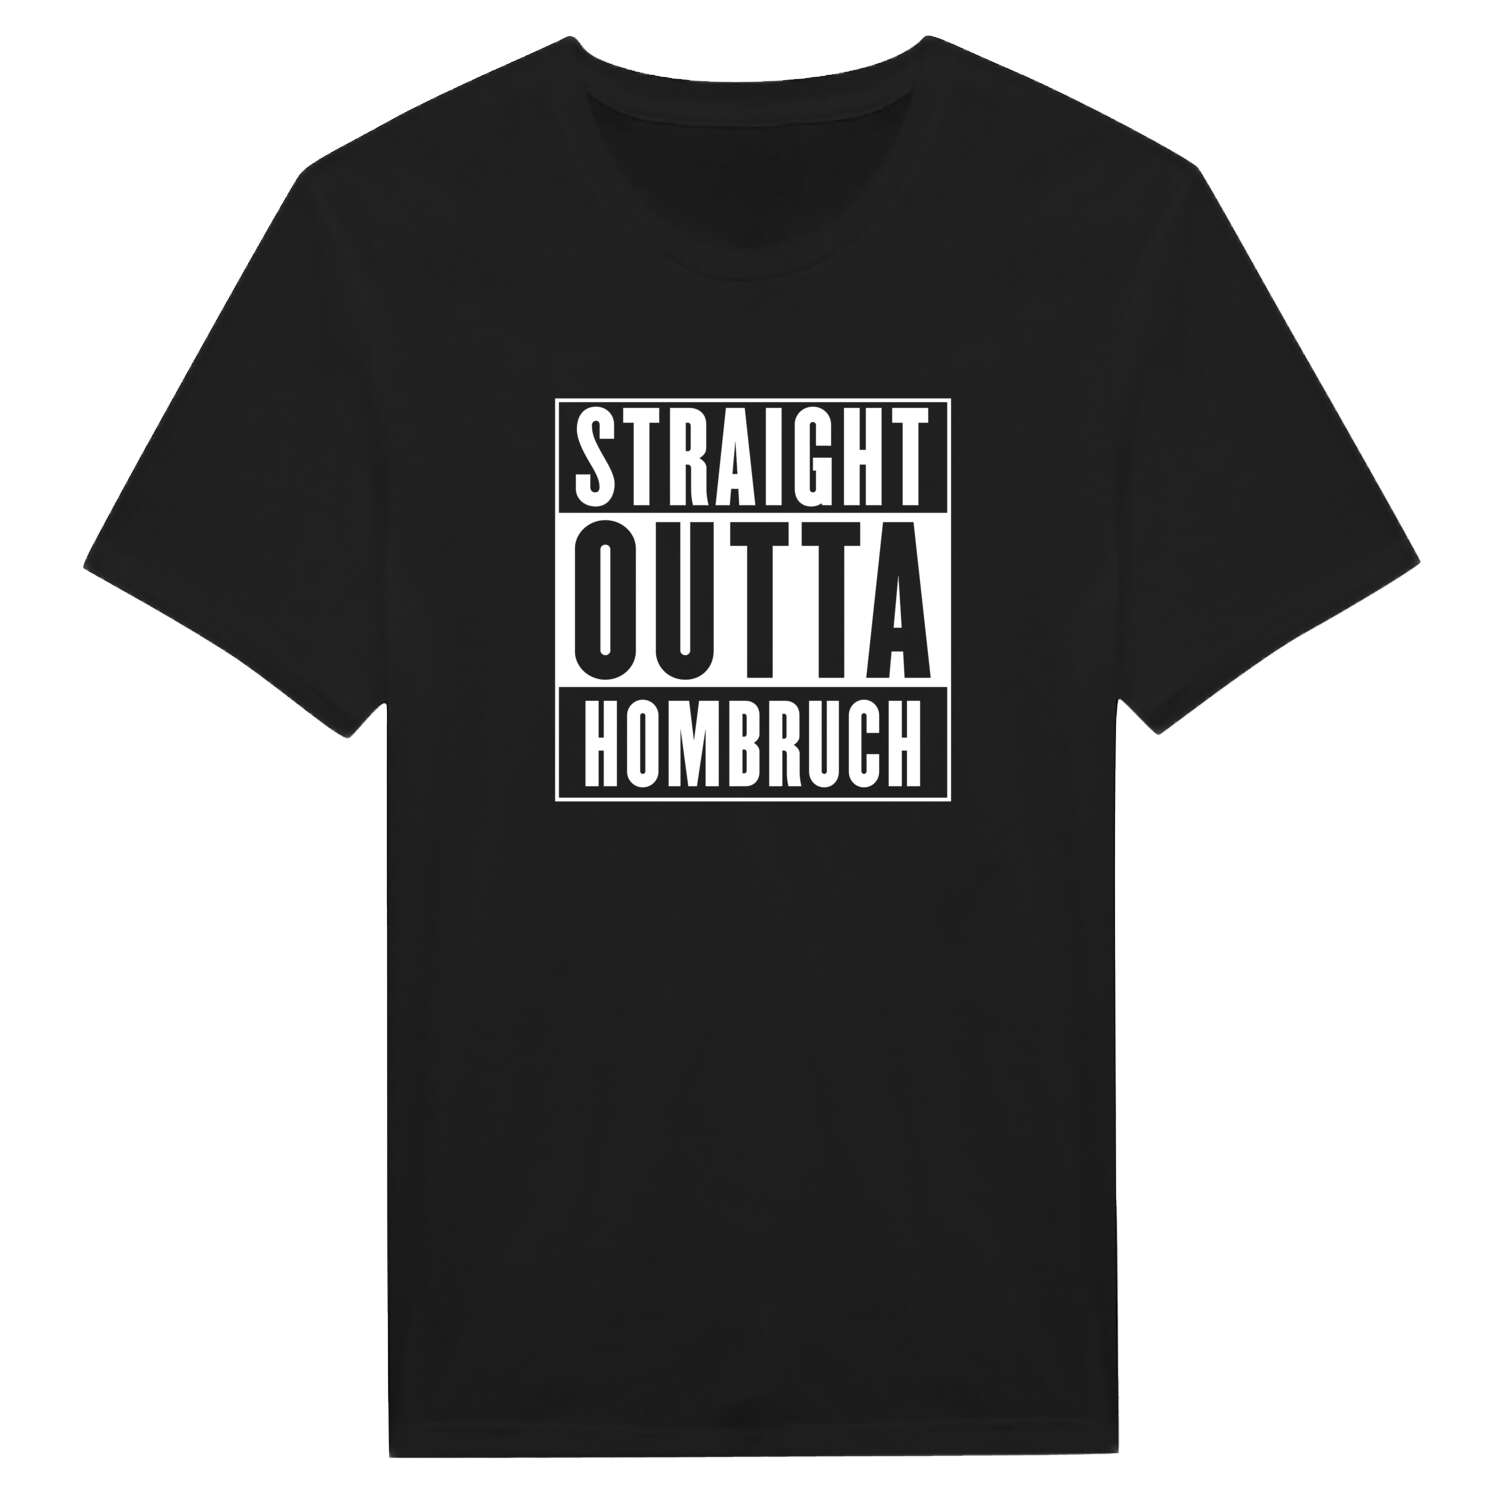 Hombruch T-Shirt »Straight Outta«